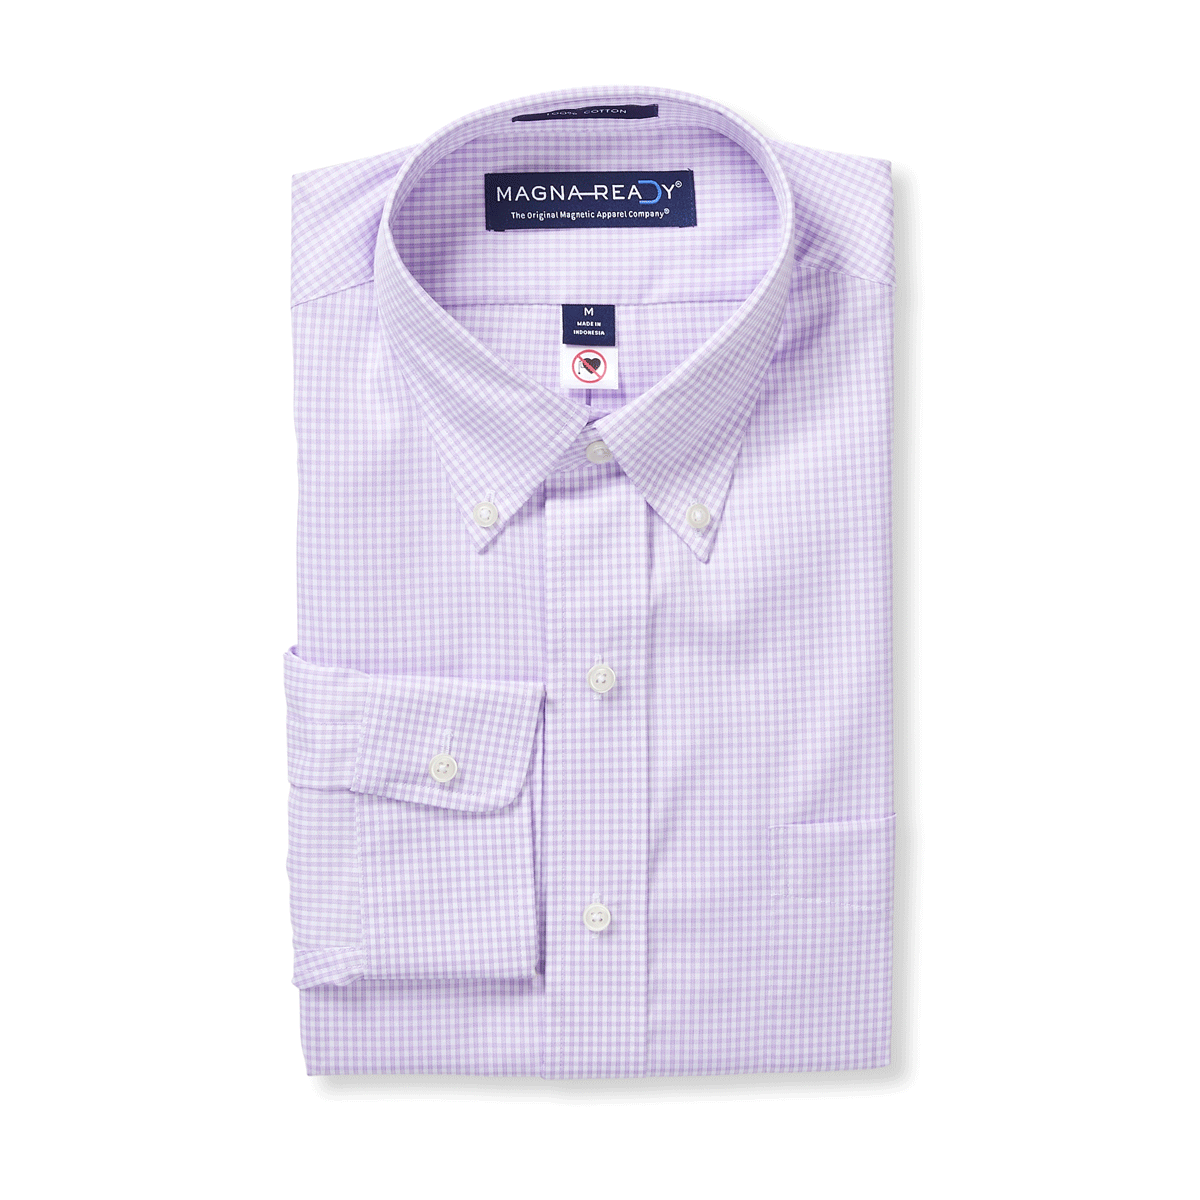 Magnetic Buttons Dress Shirt for Men - Silverts